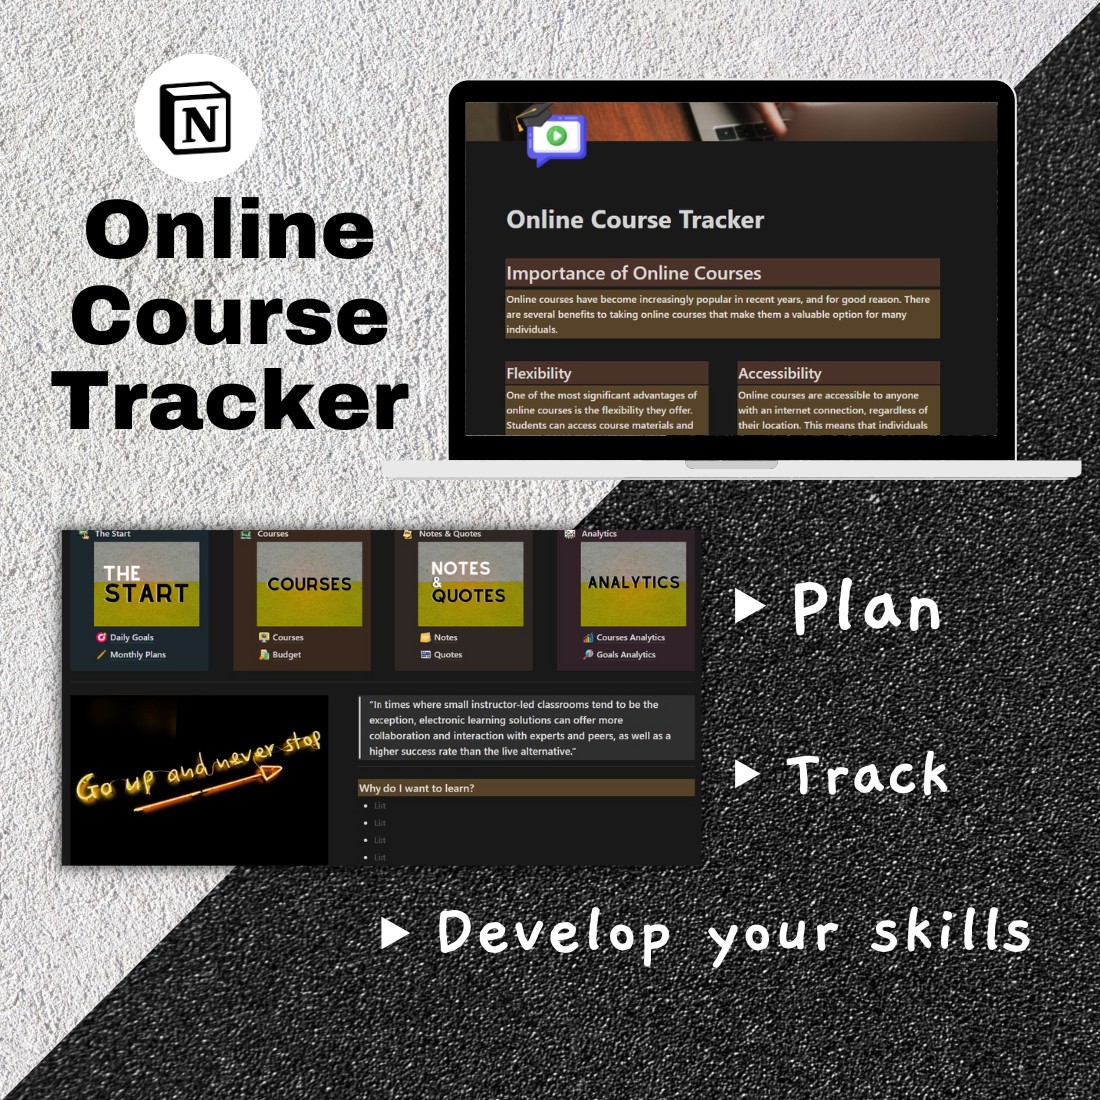 Notion Template Online Course Tracker cover image.